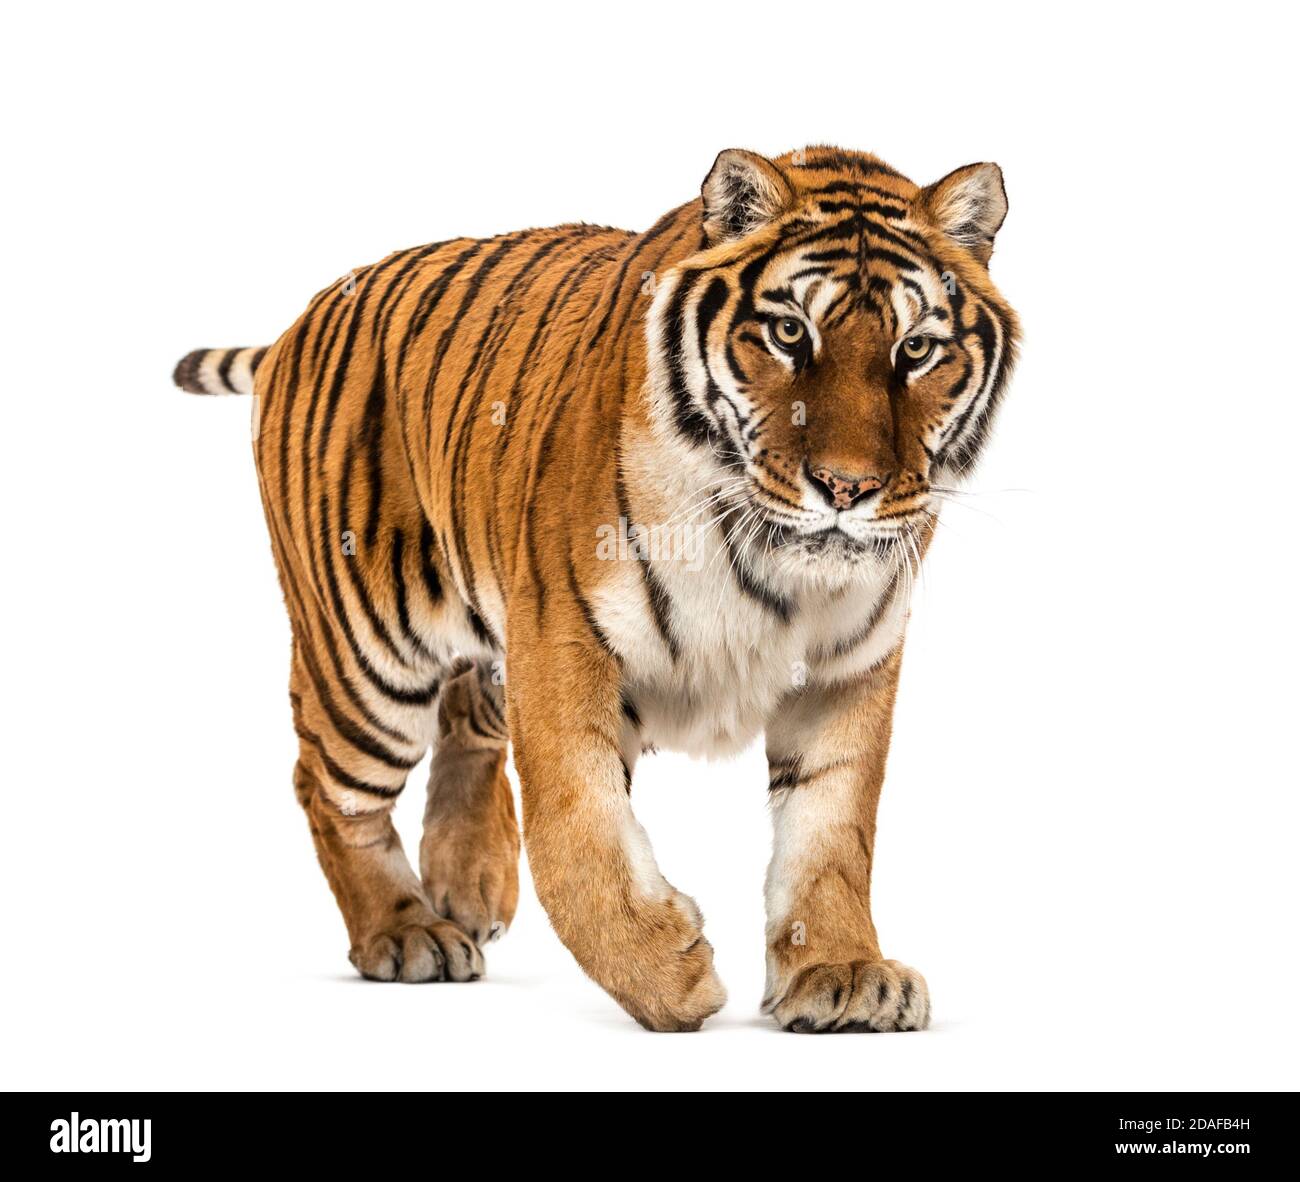 Tiger prowling and approaching, isolated Stock Photo